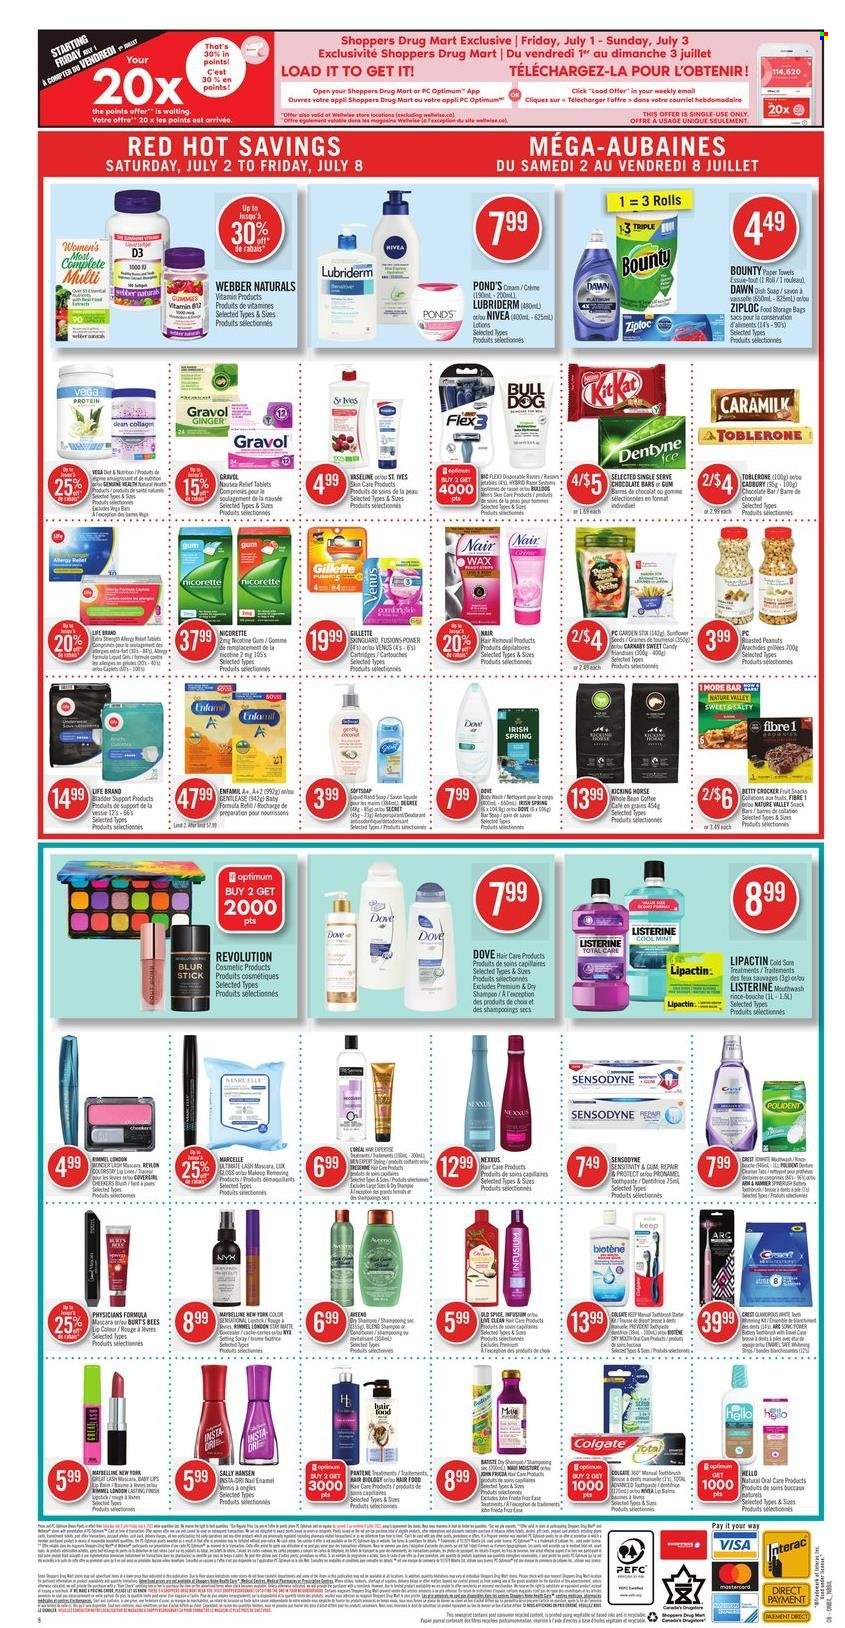 thumbnail - Shoppers Drug Mart Flyer - July 02, 2022 - July 08, 2022 - Sales products - Bounty, KitKat, brownies, Toblerone, Cadbury, chocolate bar, Nature Valley, ginger, spice, roasted peanuts, peanuts, coffee, Enfamil, Nivea, kitchen towels, paper towels, Lux, Softsoap, soap bar, POND'S, soap, toothpaste, mouthwash, Polident, Crest, Gillette, NYX Cosmetics, Nexxus, Lubriderm, Venus, hair removal, Ziploc, nail enamel, corrector, mascara, Maybelline, Rimmel, setting spray, storage bag, Optimum, Nicorette, nicotine therapy, vitamin B12, vitamin D3, Dove, Colgate, Listerine, Sally Hansen, shampoo, Pantene, Old Spice, Sensodyne. Page 10.